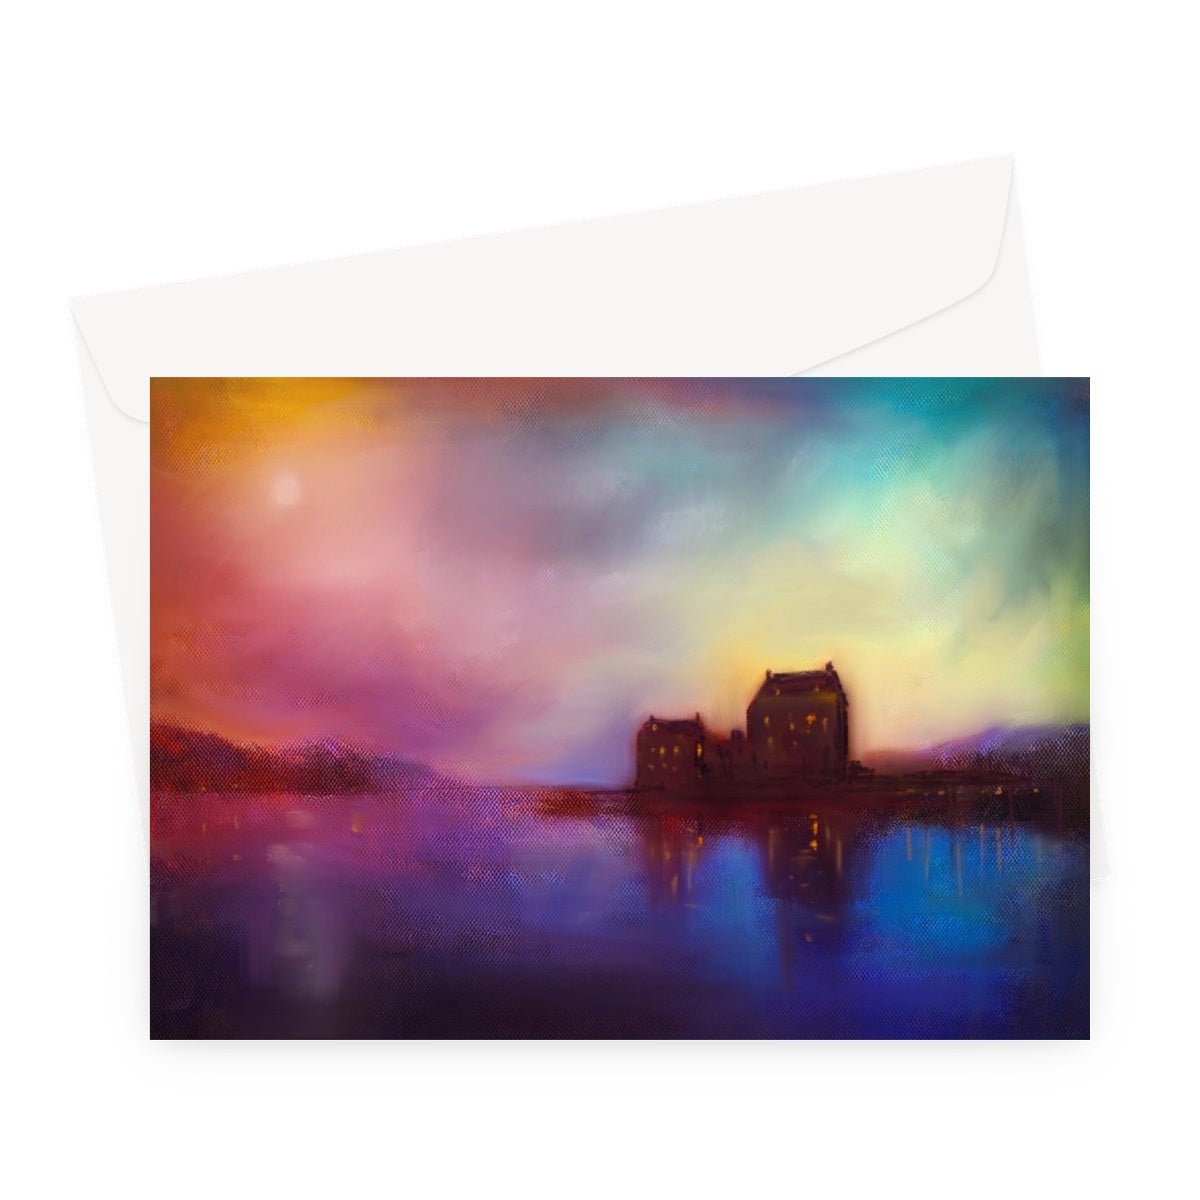 Eilean Donan Castle Sunset Art Gifts Greeting Card-Greetings Cards-Scottish Castles Art Gallery-A5 Landscape-10 Cards-Paintings, Prints, Homeware, Art Gifts From Scotland By Scottish Artist Kevin Hunter